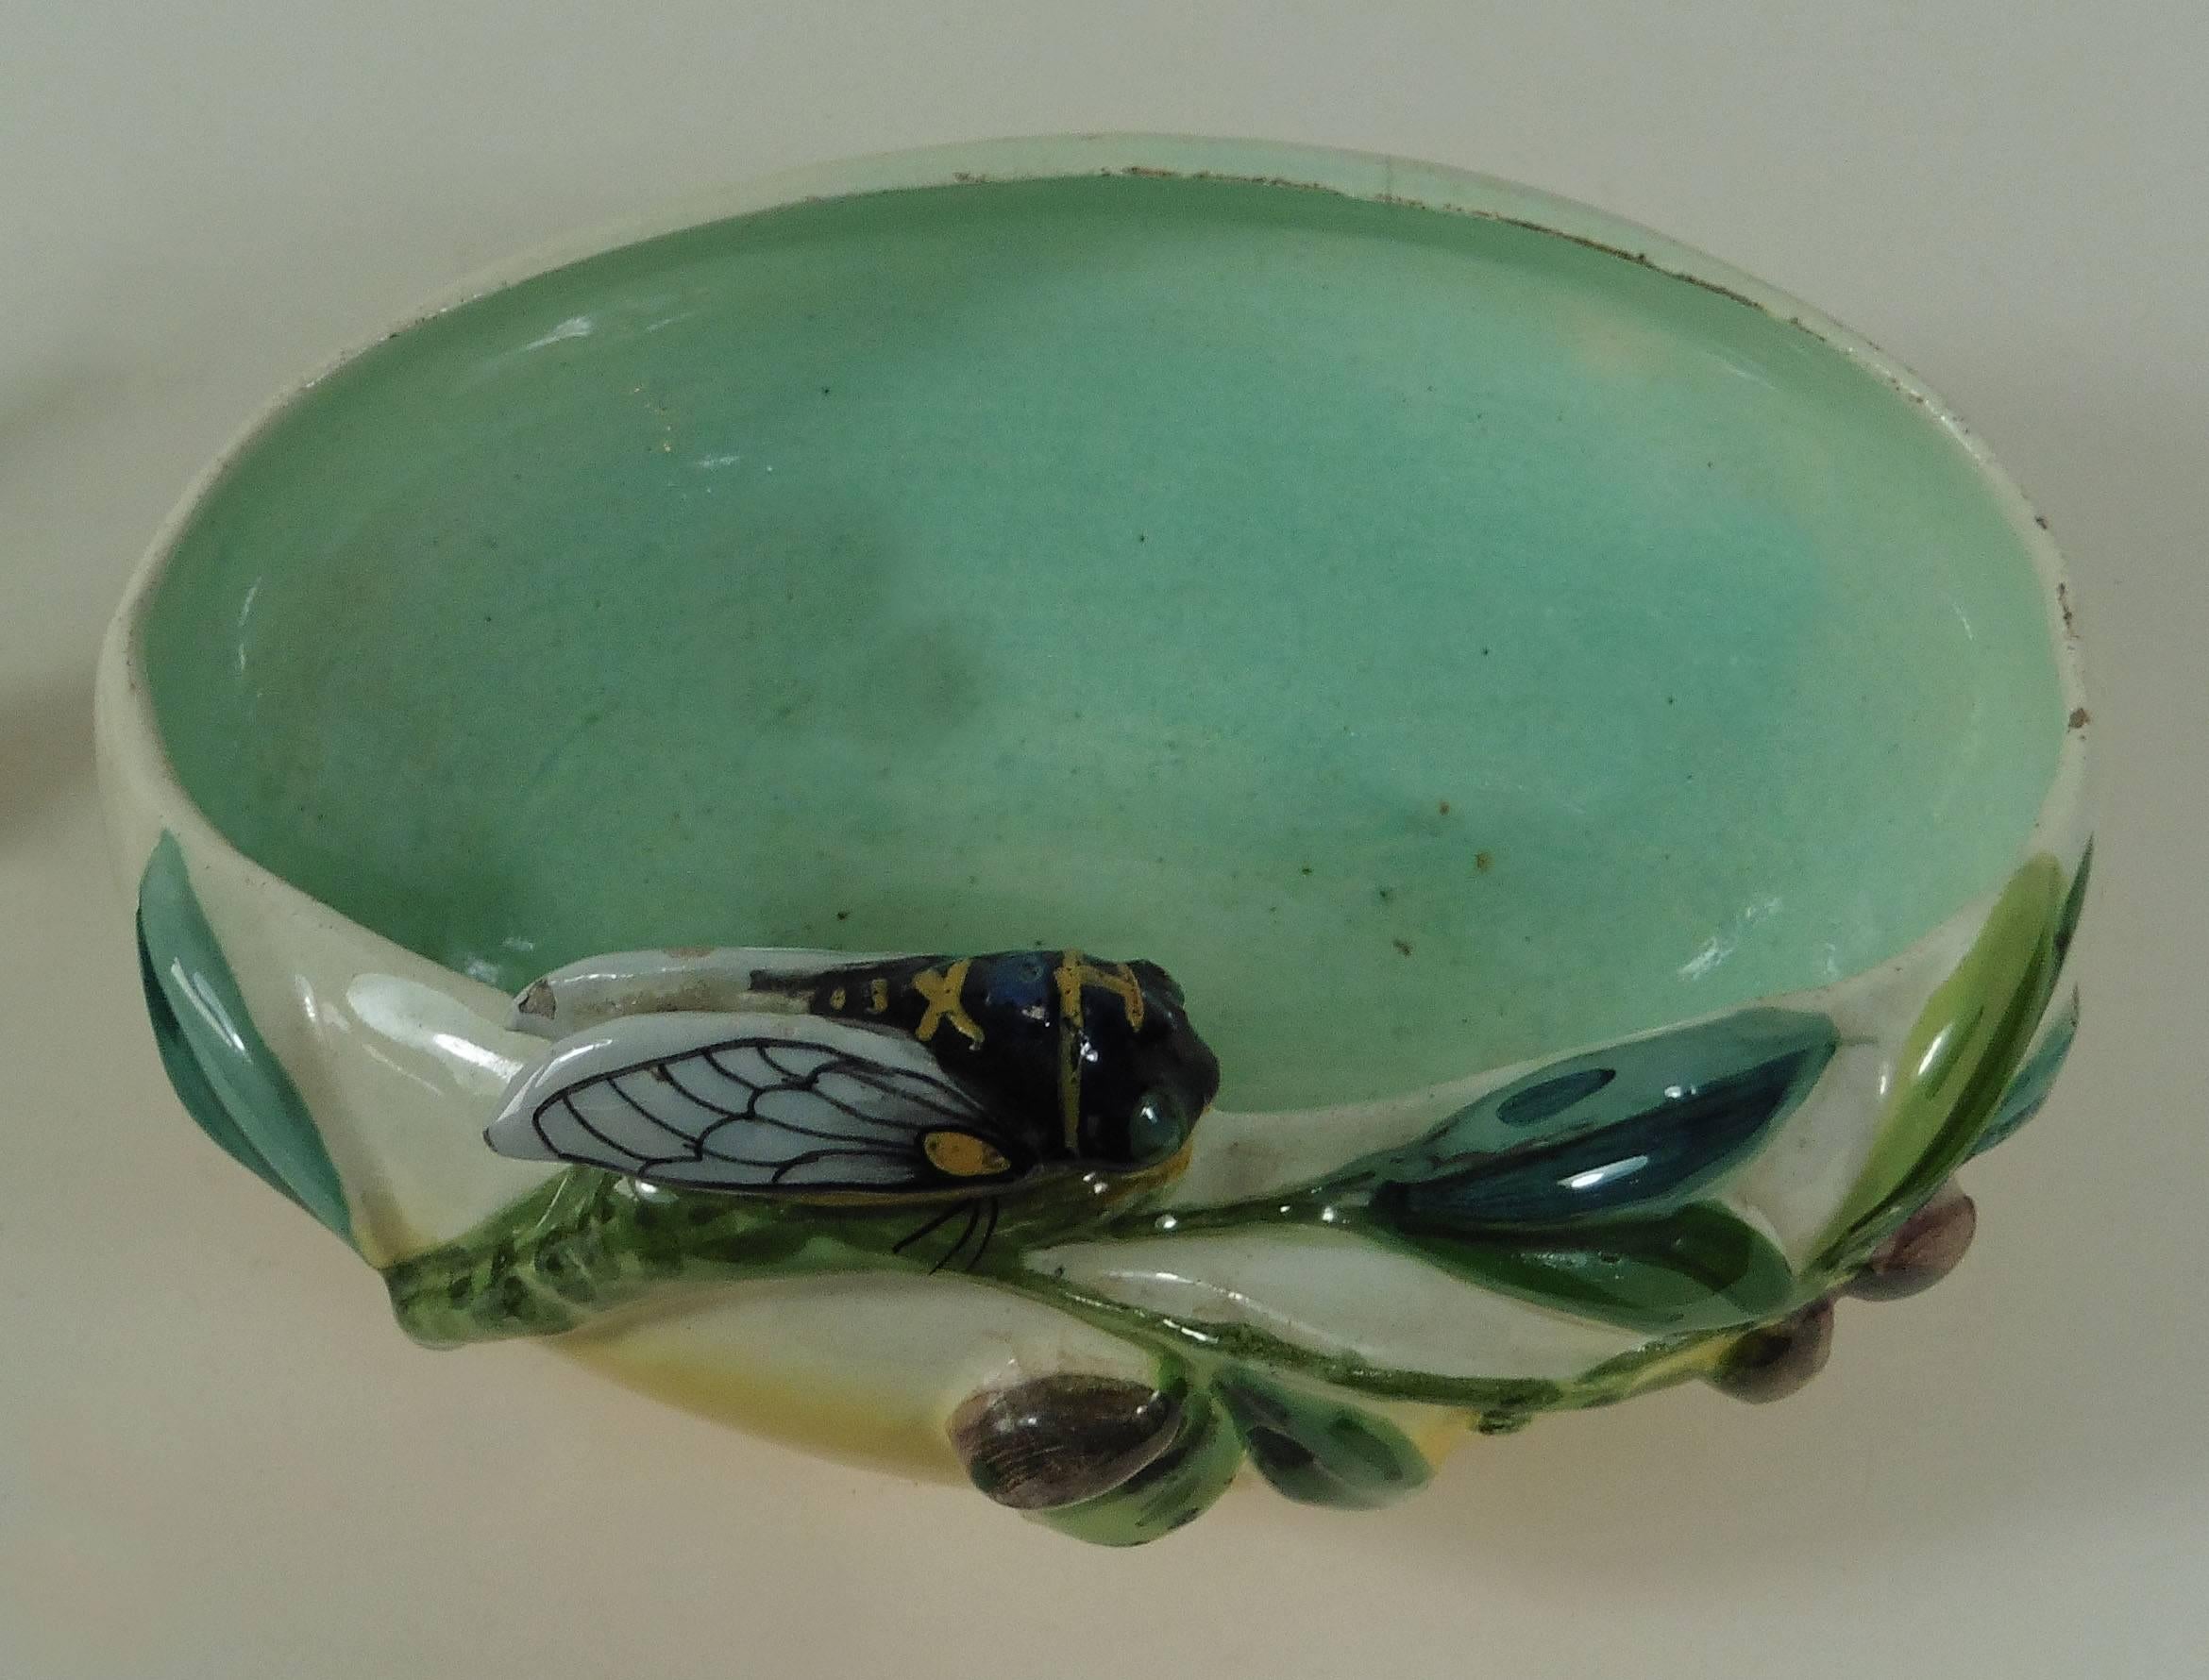 French Majolica oval jardiniere with cicada and olive in relief signed Jerome Massier Fils, circa 1910.
A typical piece from Provence.